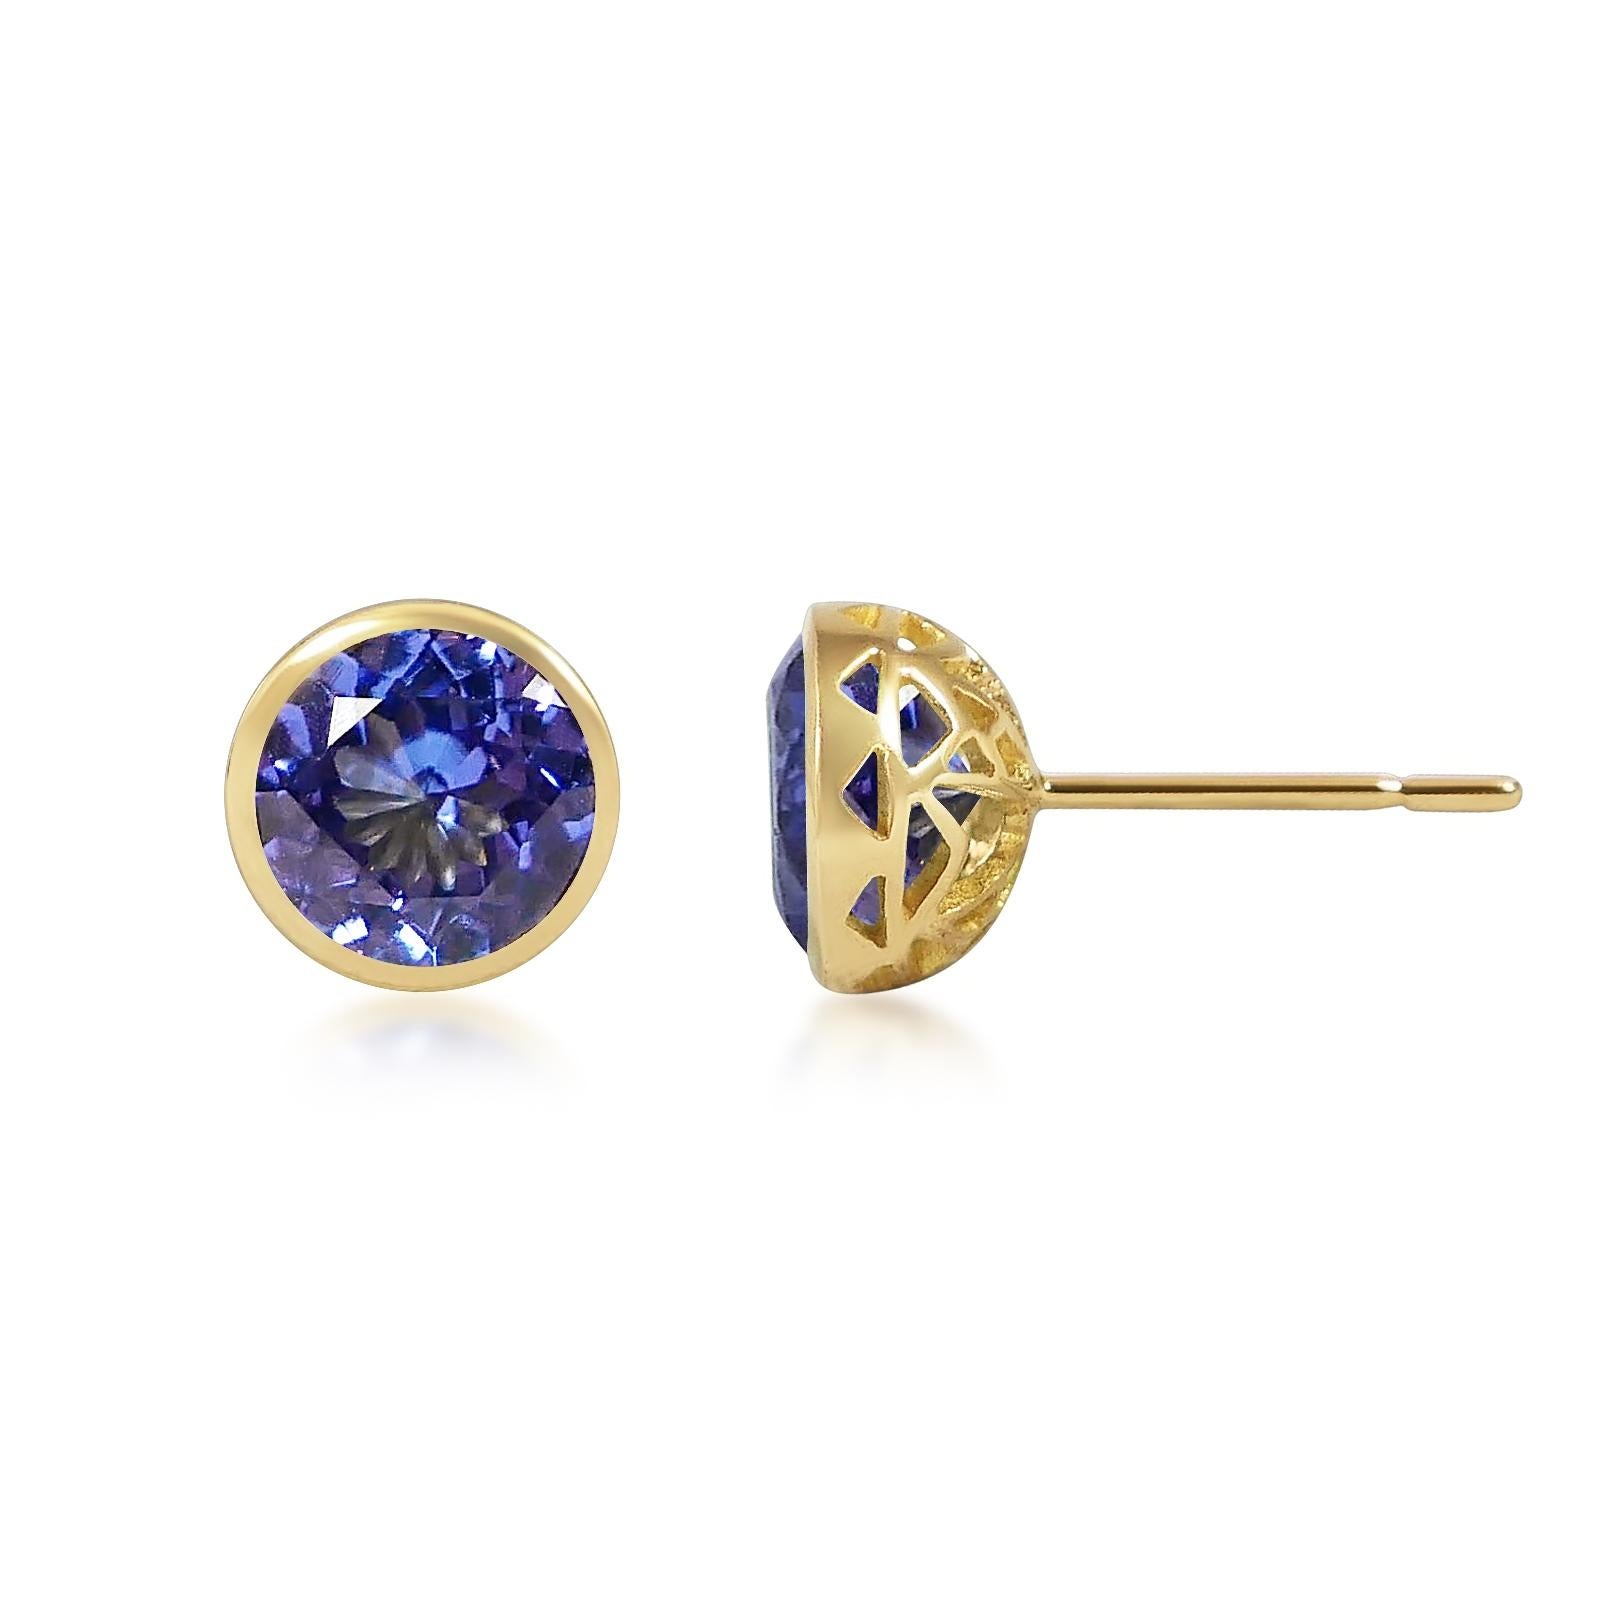 Brilliant Cut Handcrafted 2.80 Carats Tanzanite 18 Karat Yellow Gold Stud Earrings For Sale